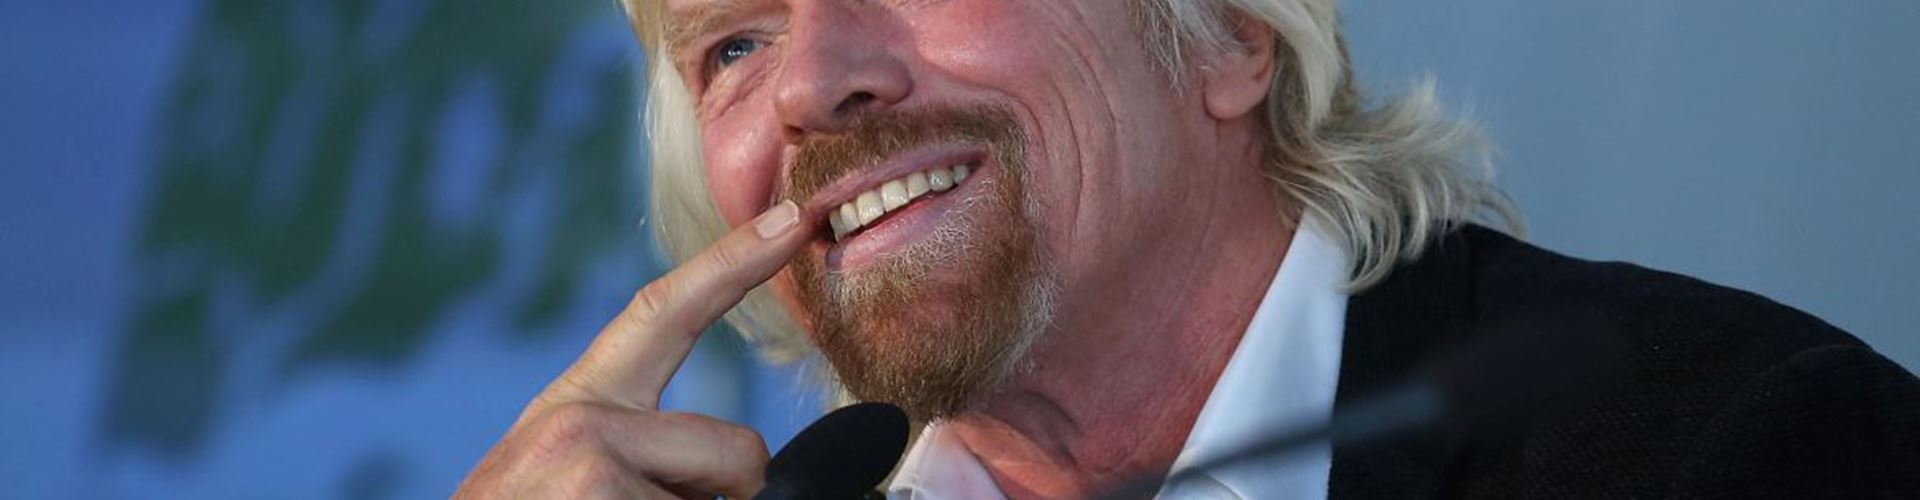 “Just do it”, says Richard Branson to young entrepreneurs